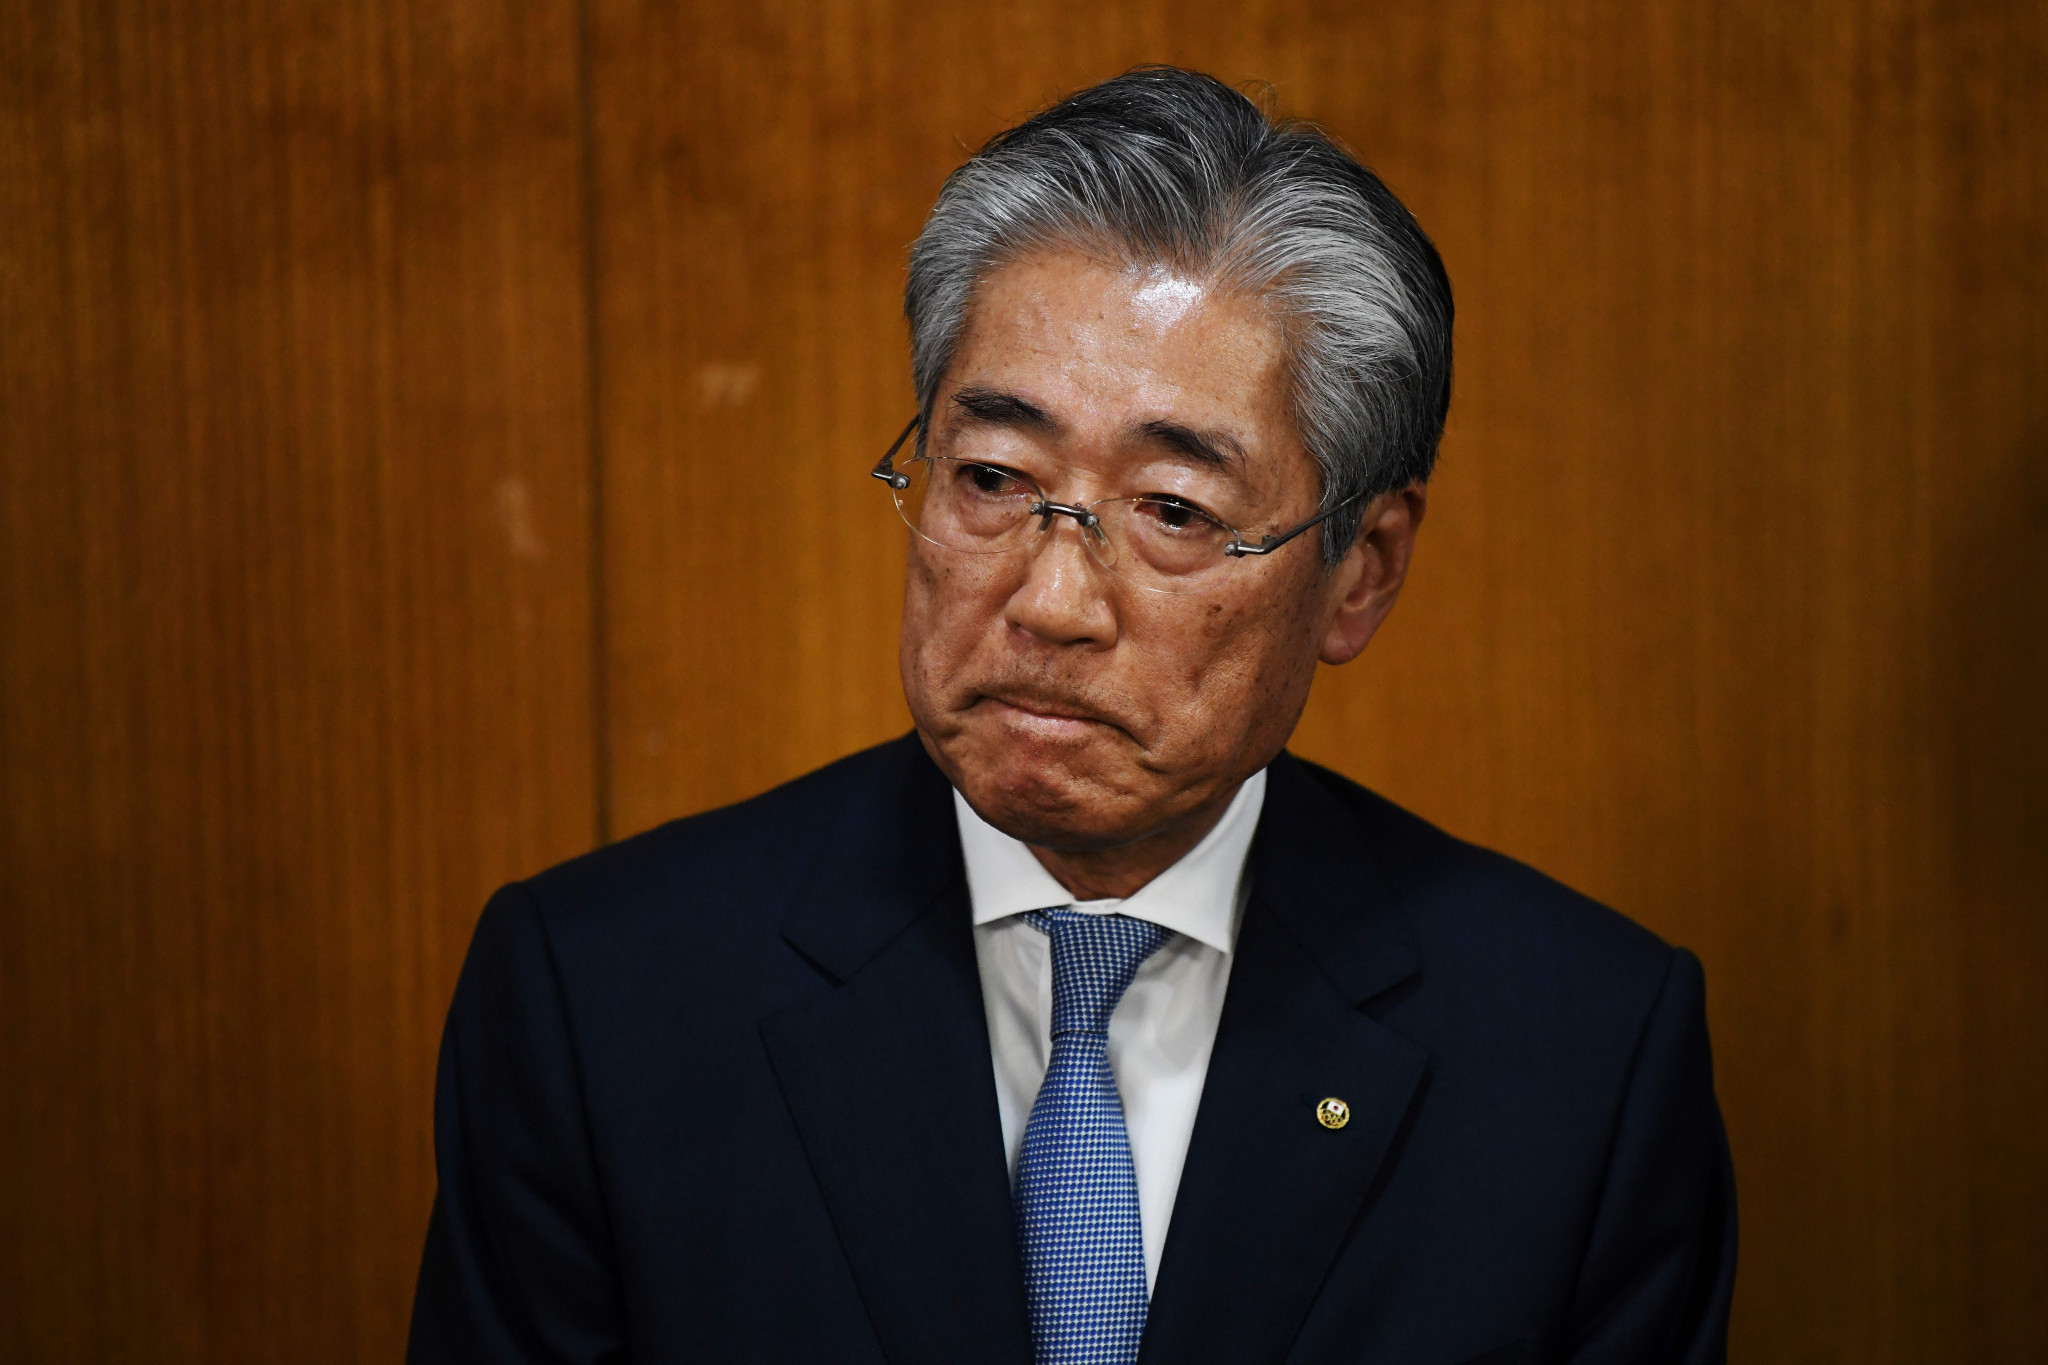 Tsunekazu Takeda has been questioned in connection with a Tokyo 2020 bribery case ©Getty Images